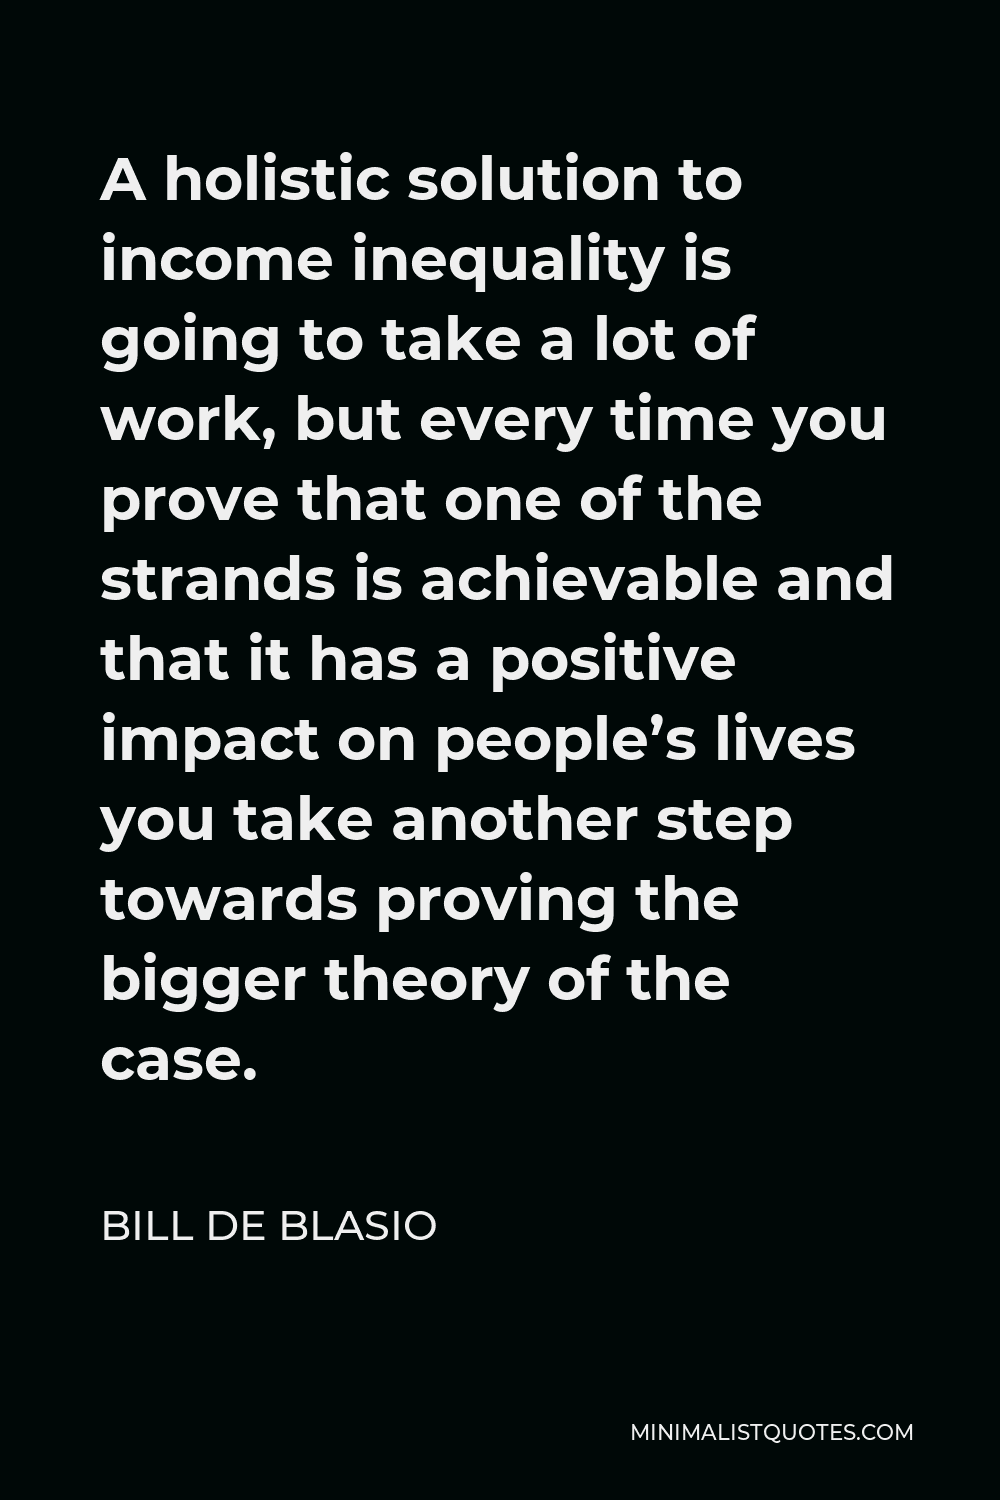 Bill de Blasio Quote - A holistic solution to income inequality is going to take a lot of work, but every time you prove that one of the strands is achievable and that it has a positive impact on people’s lives you take another step towards proving the bigger theory of the case.